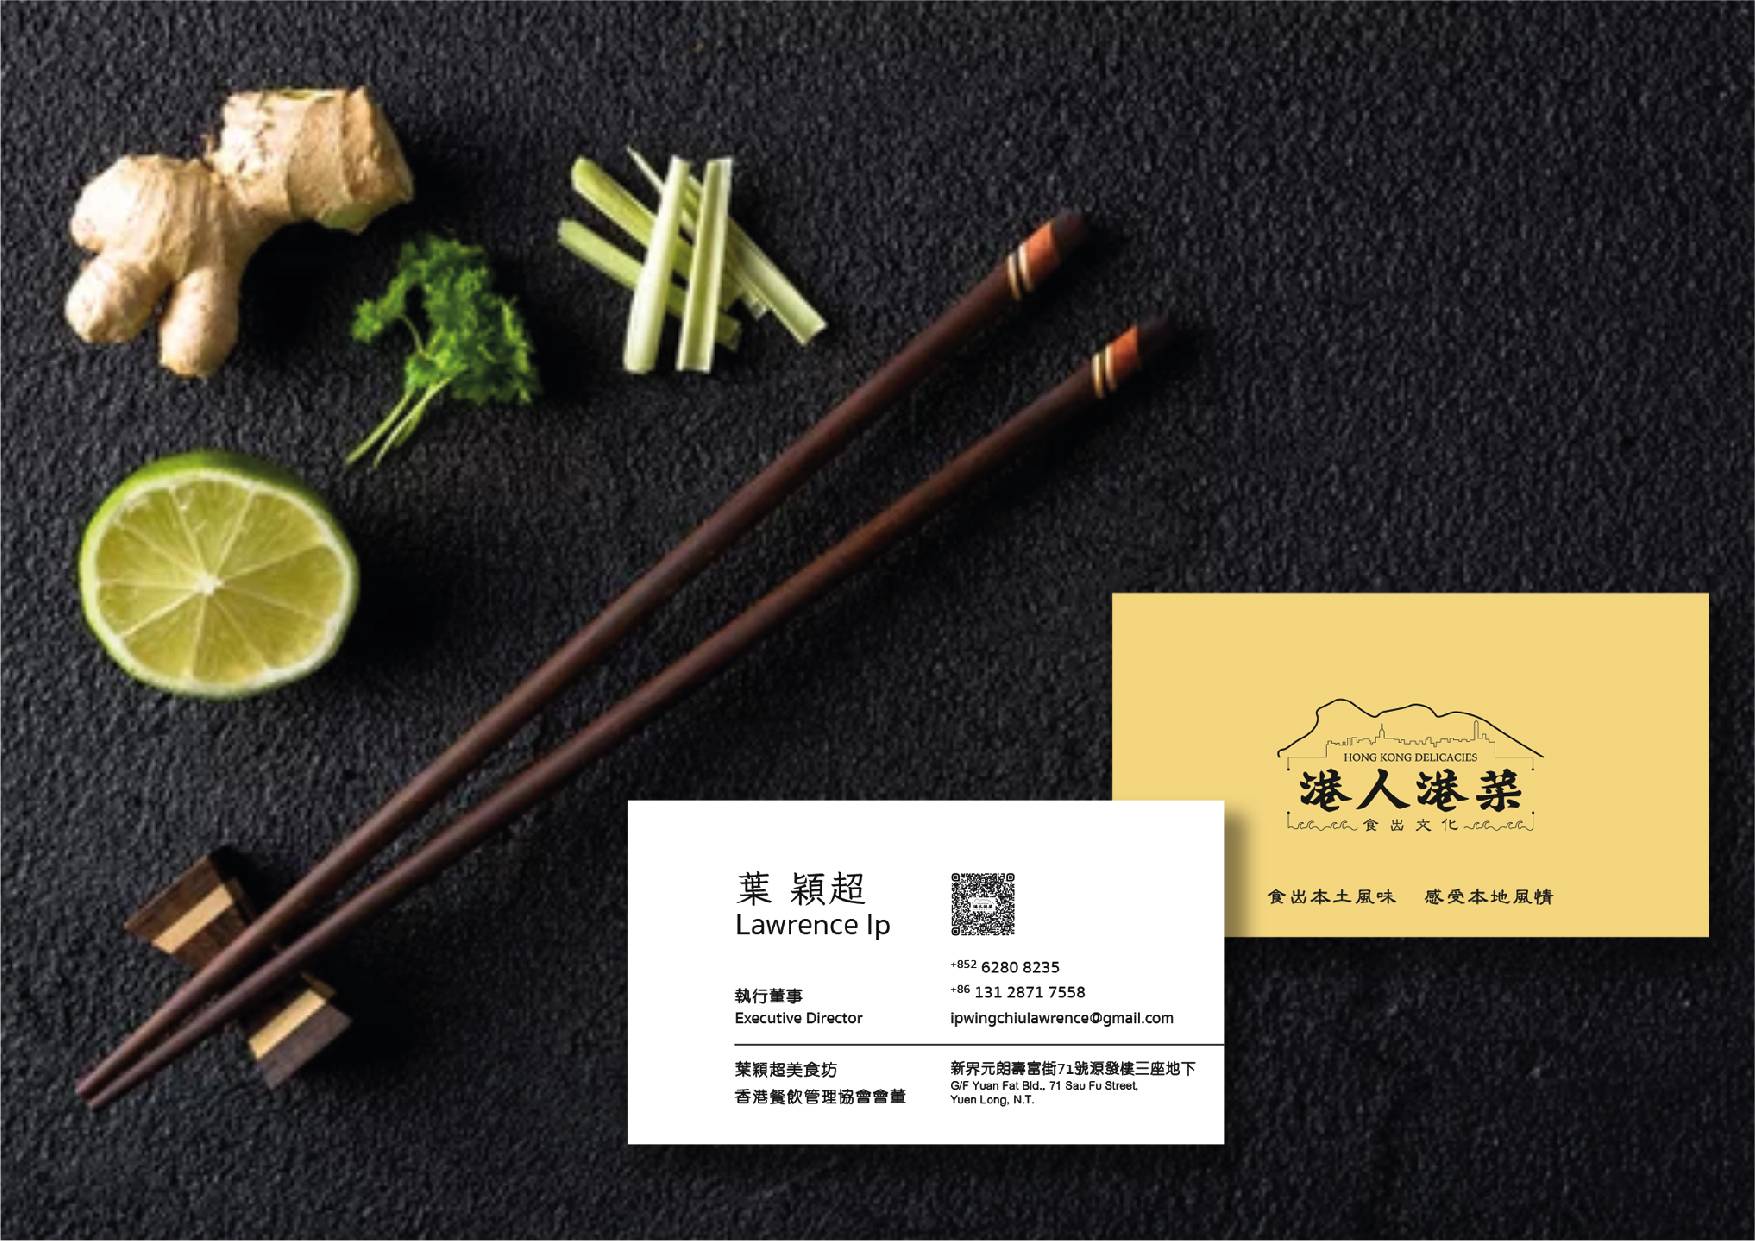  Hong Kong Delicacies rebranding for a business card design on the table